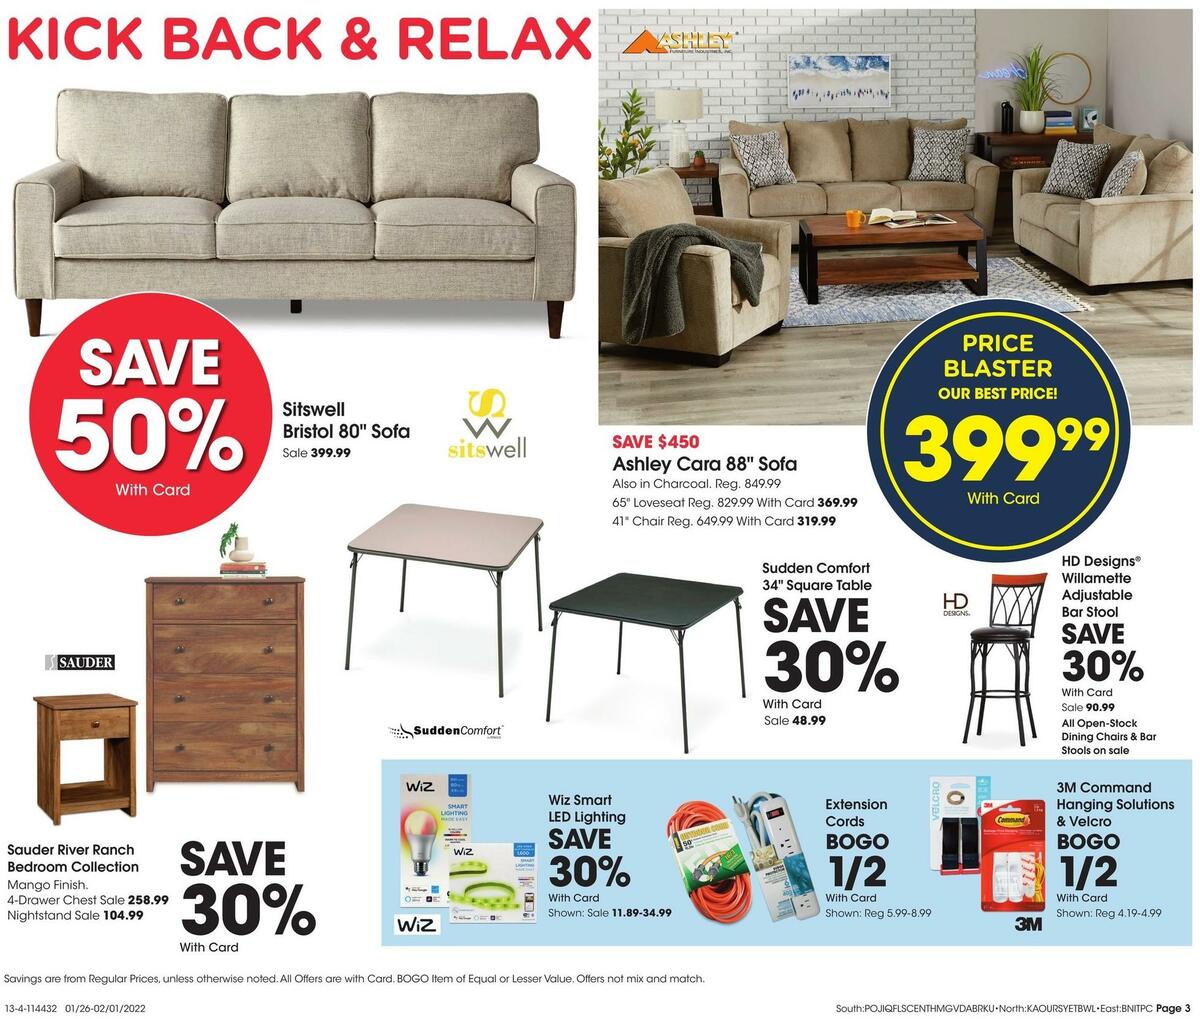 Fred Meyer General Merchandise Weekly Ad from January 26